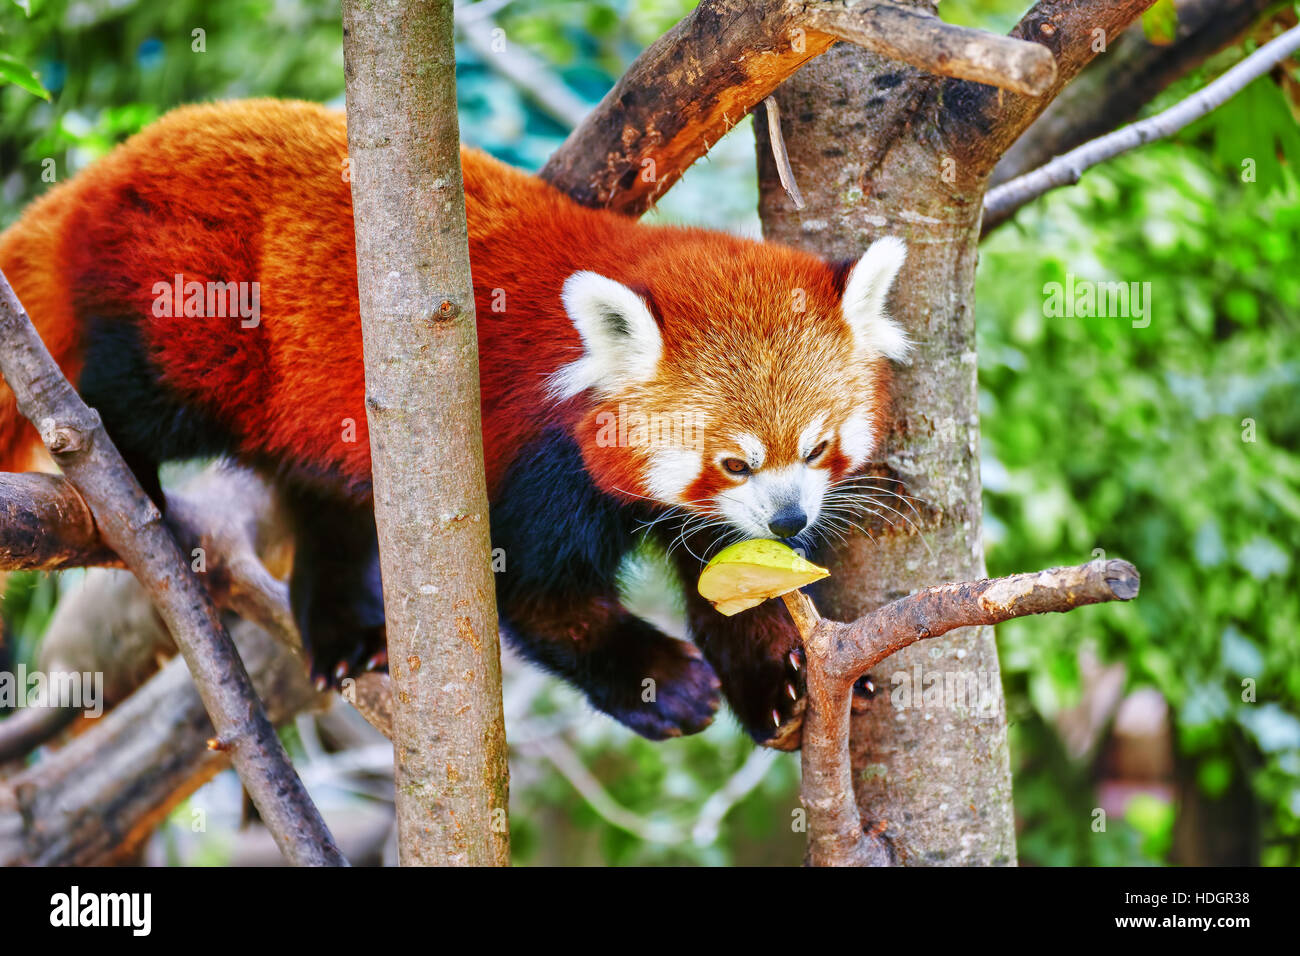 Red Panda in its natural habitat of the wild. Stock Photo